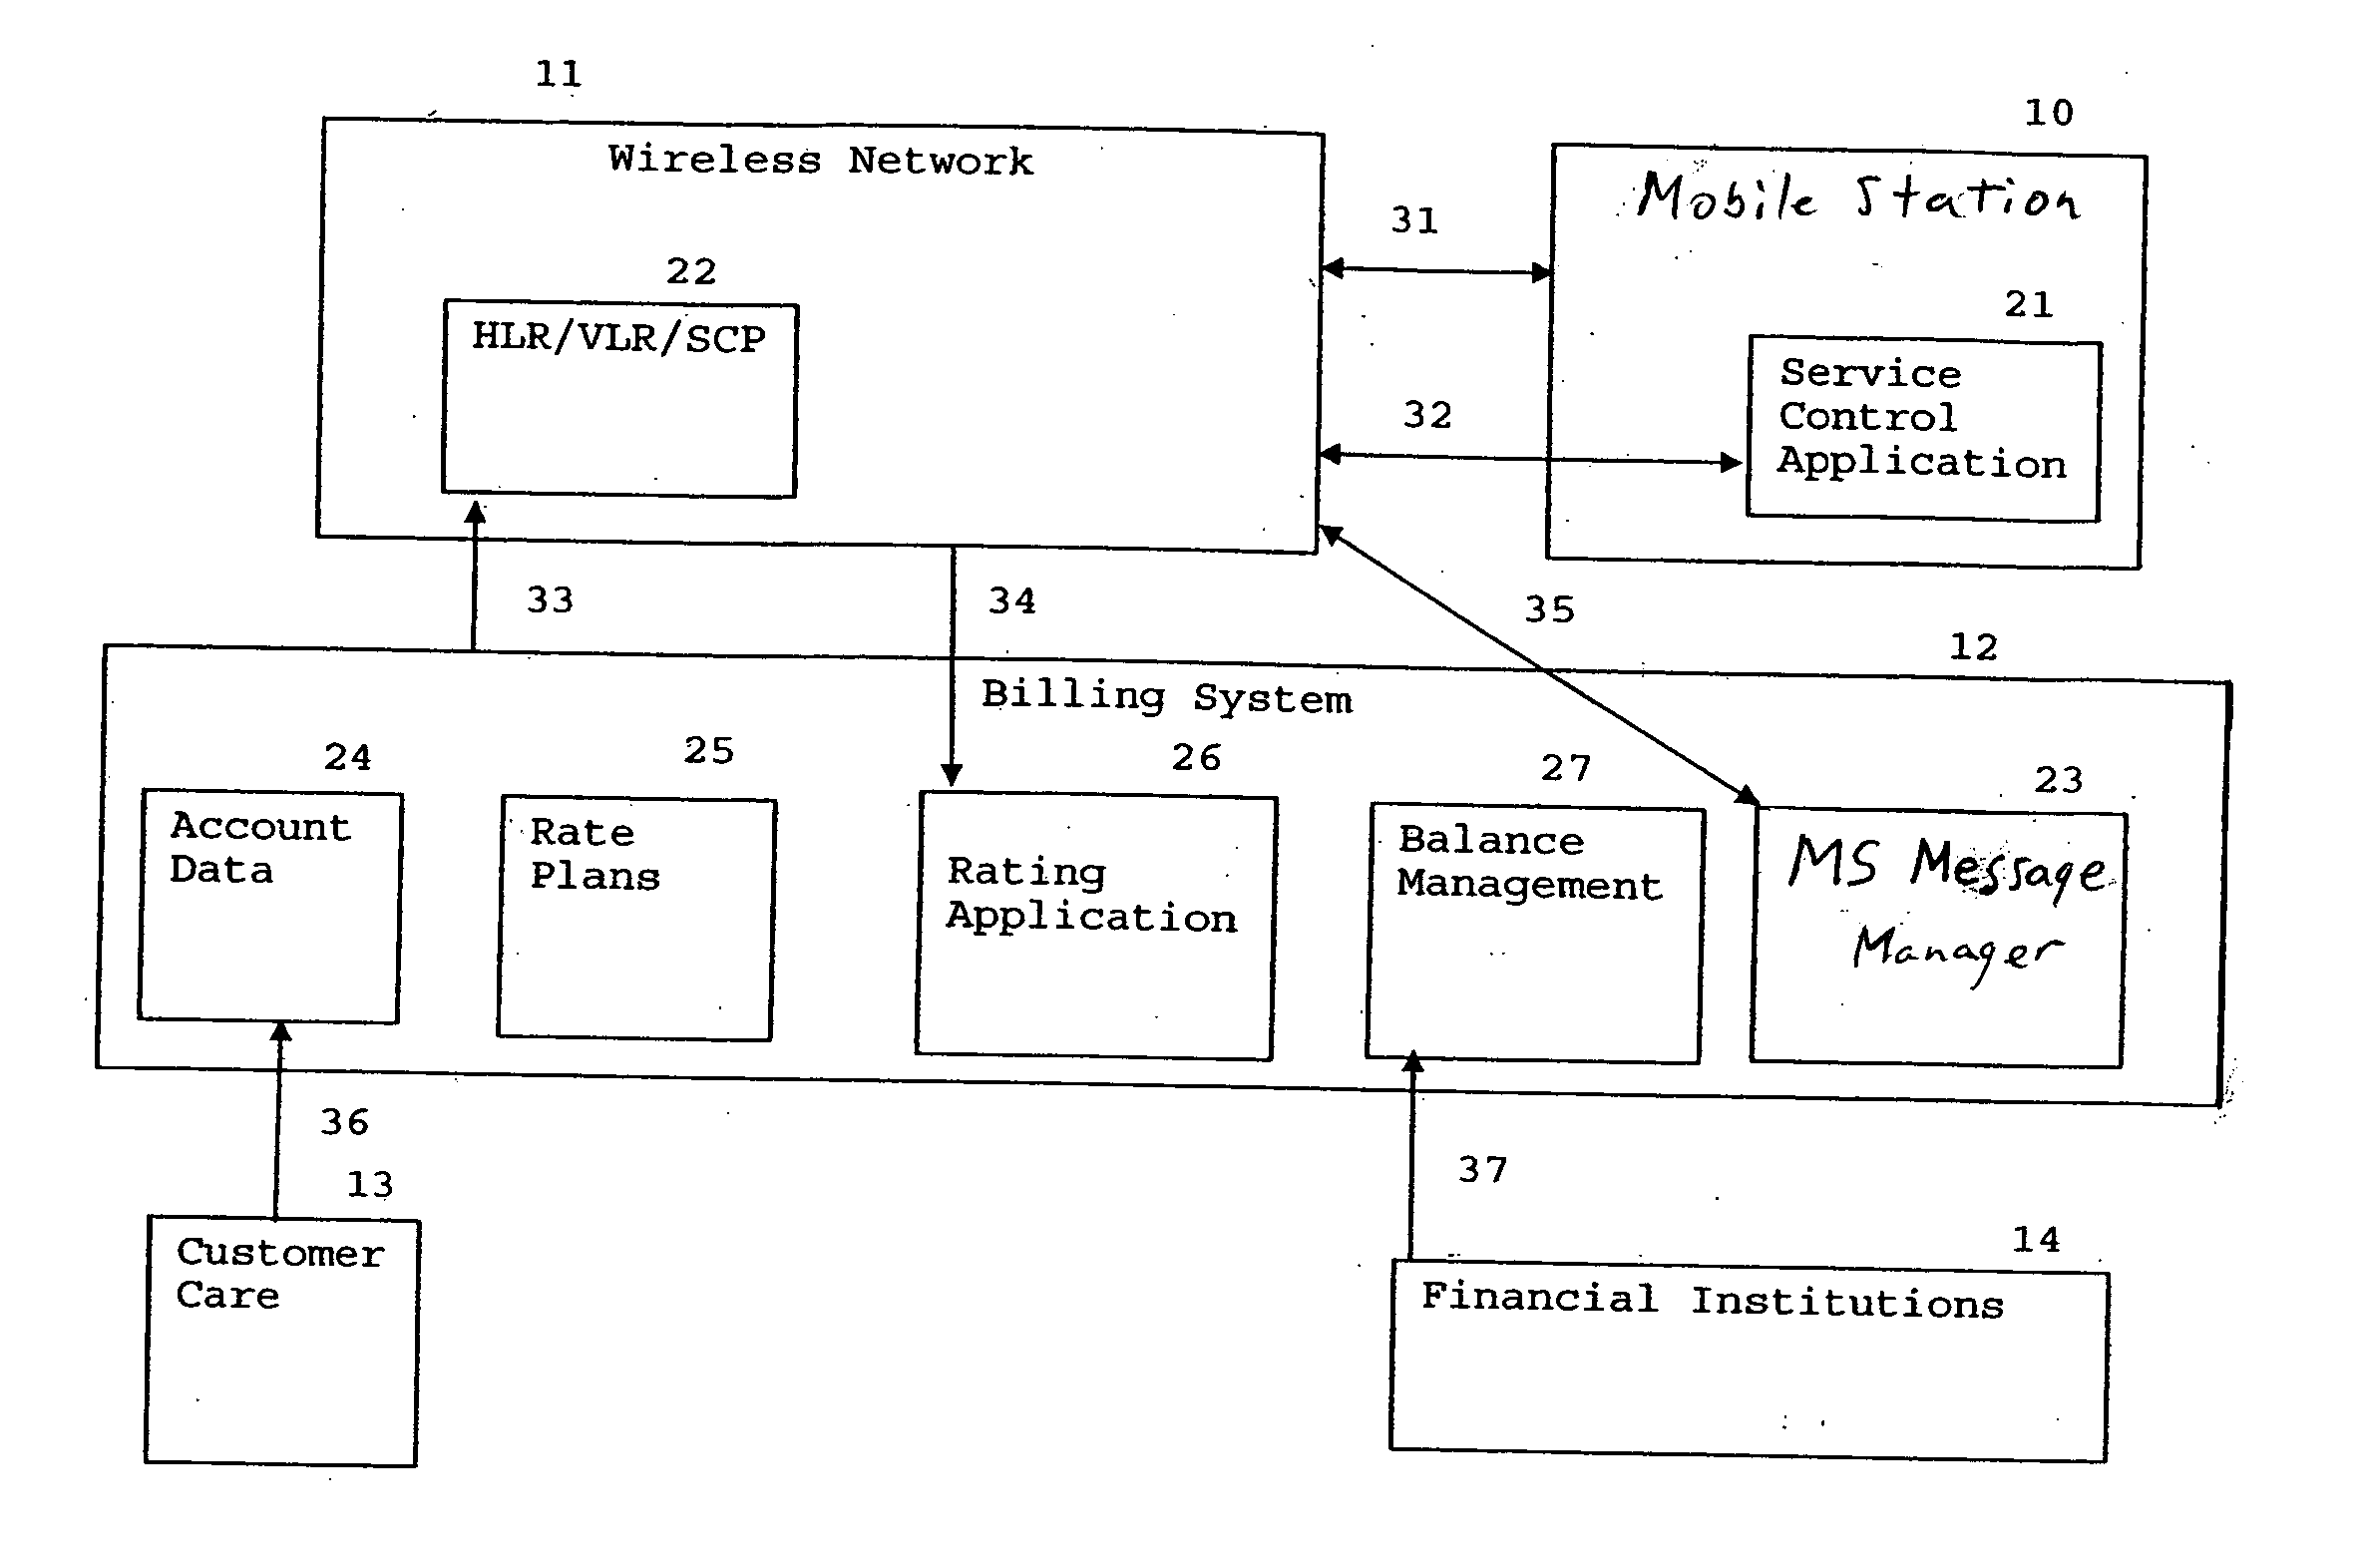 Systems and methods for mobile station service control